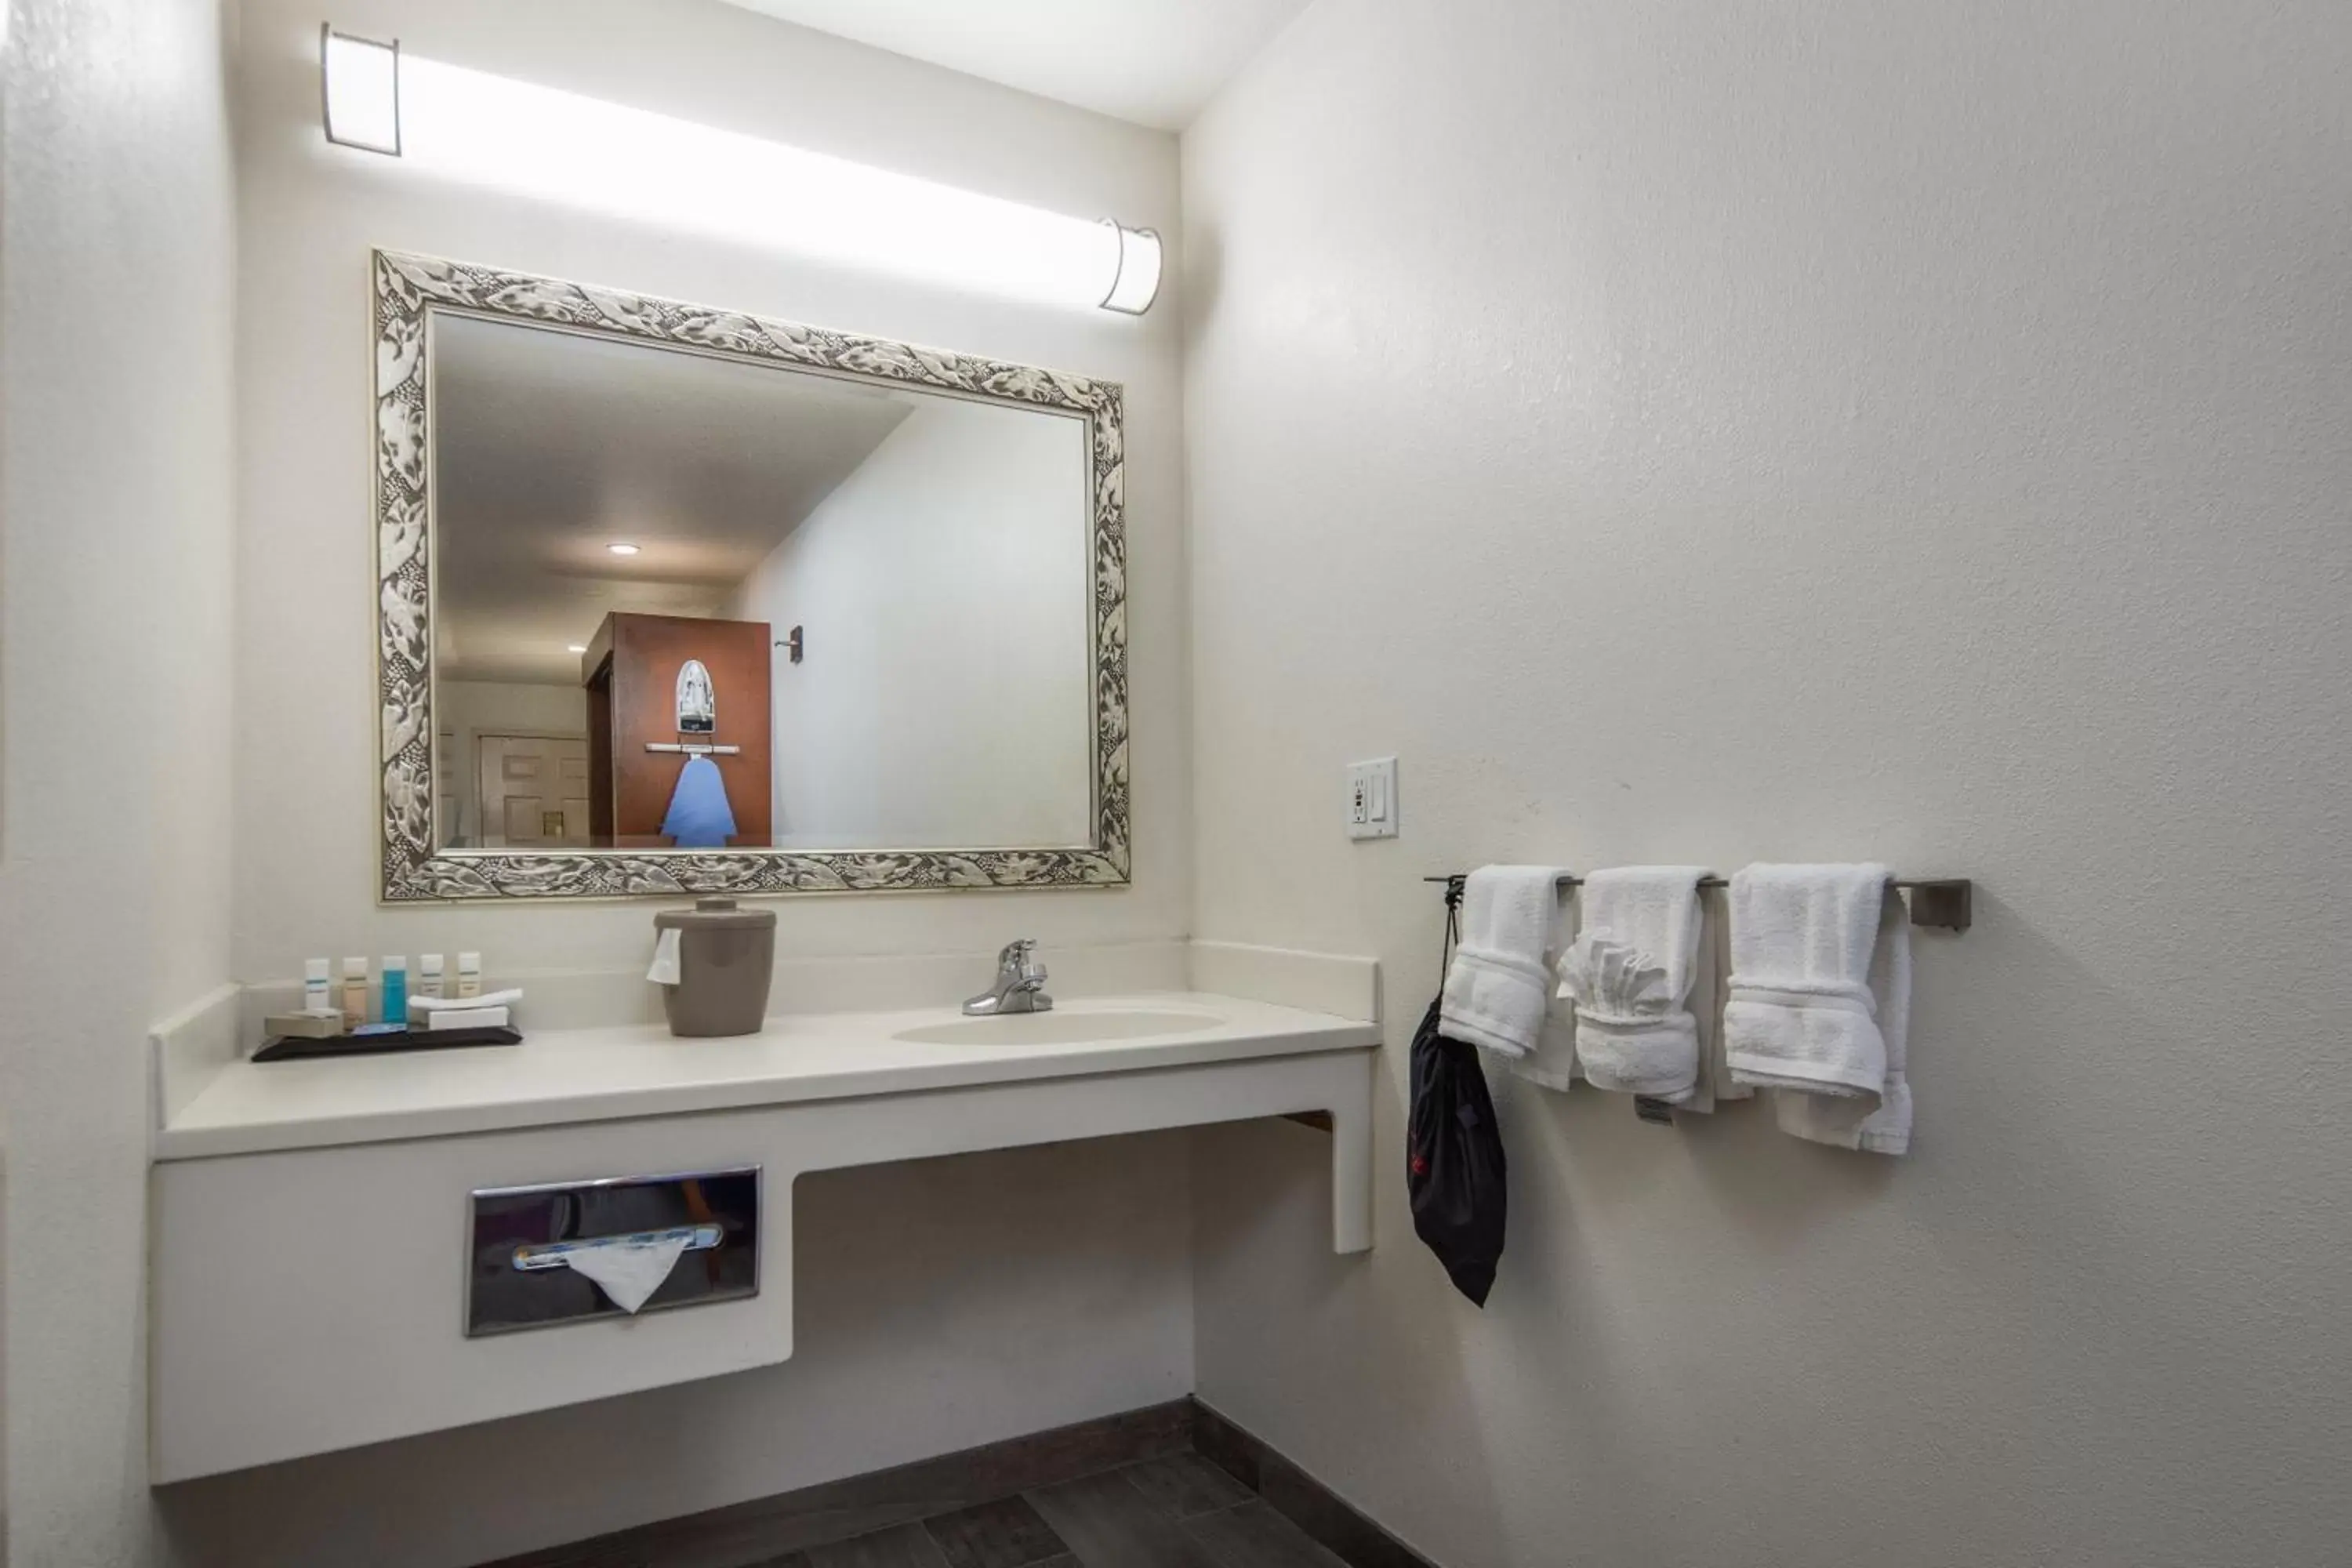 Bathroom in Atherton Park Inn and Suites